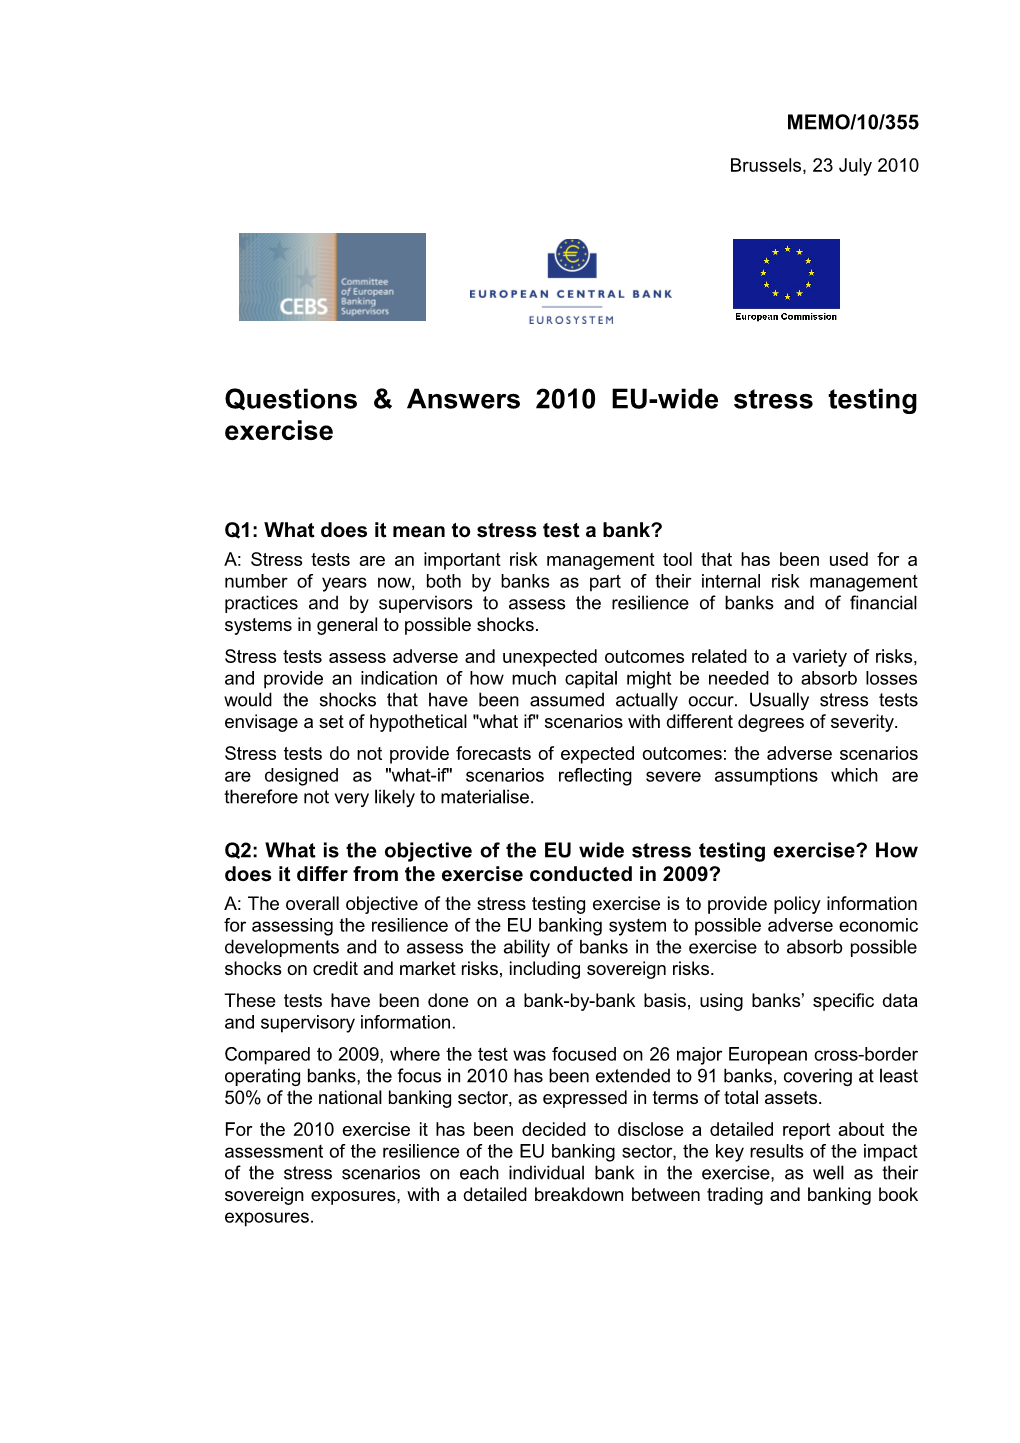 Questions & Answers2010 EU-Wide Stress Testing Exercise